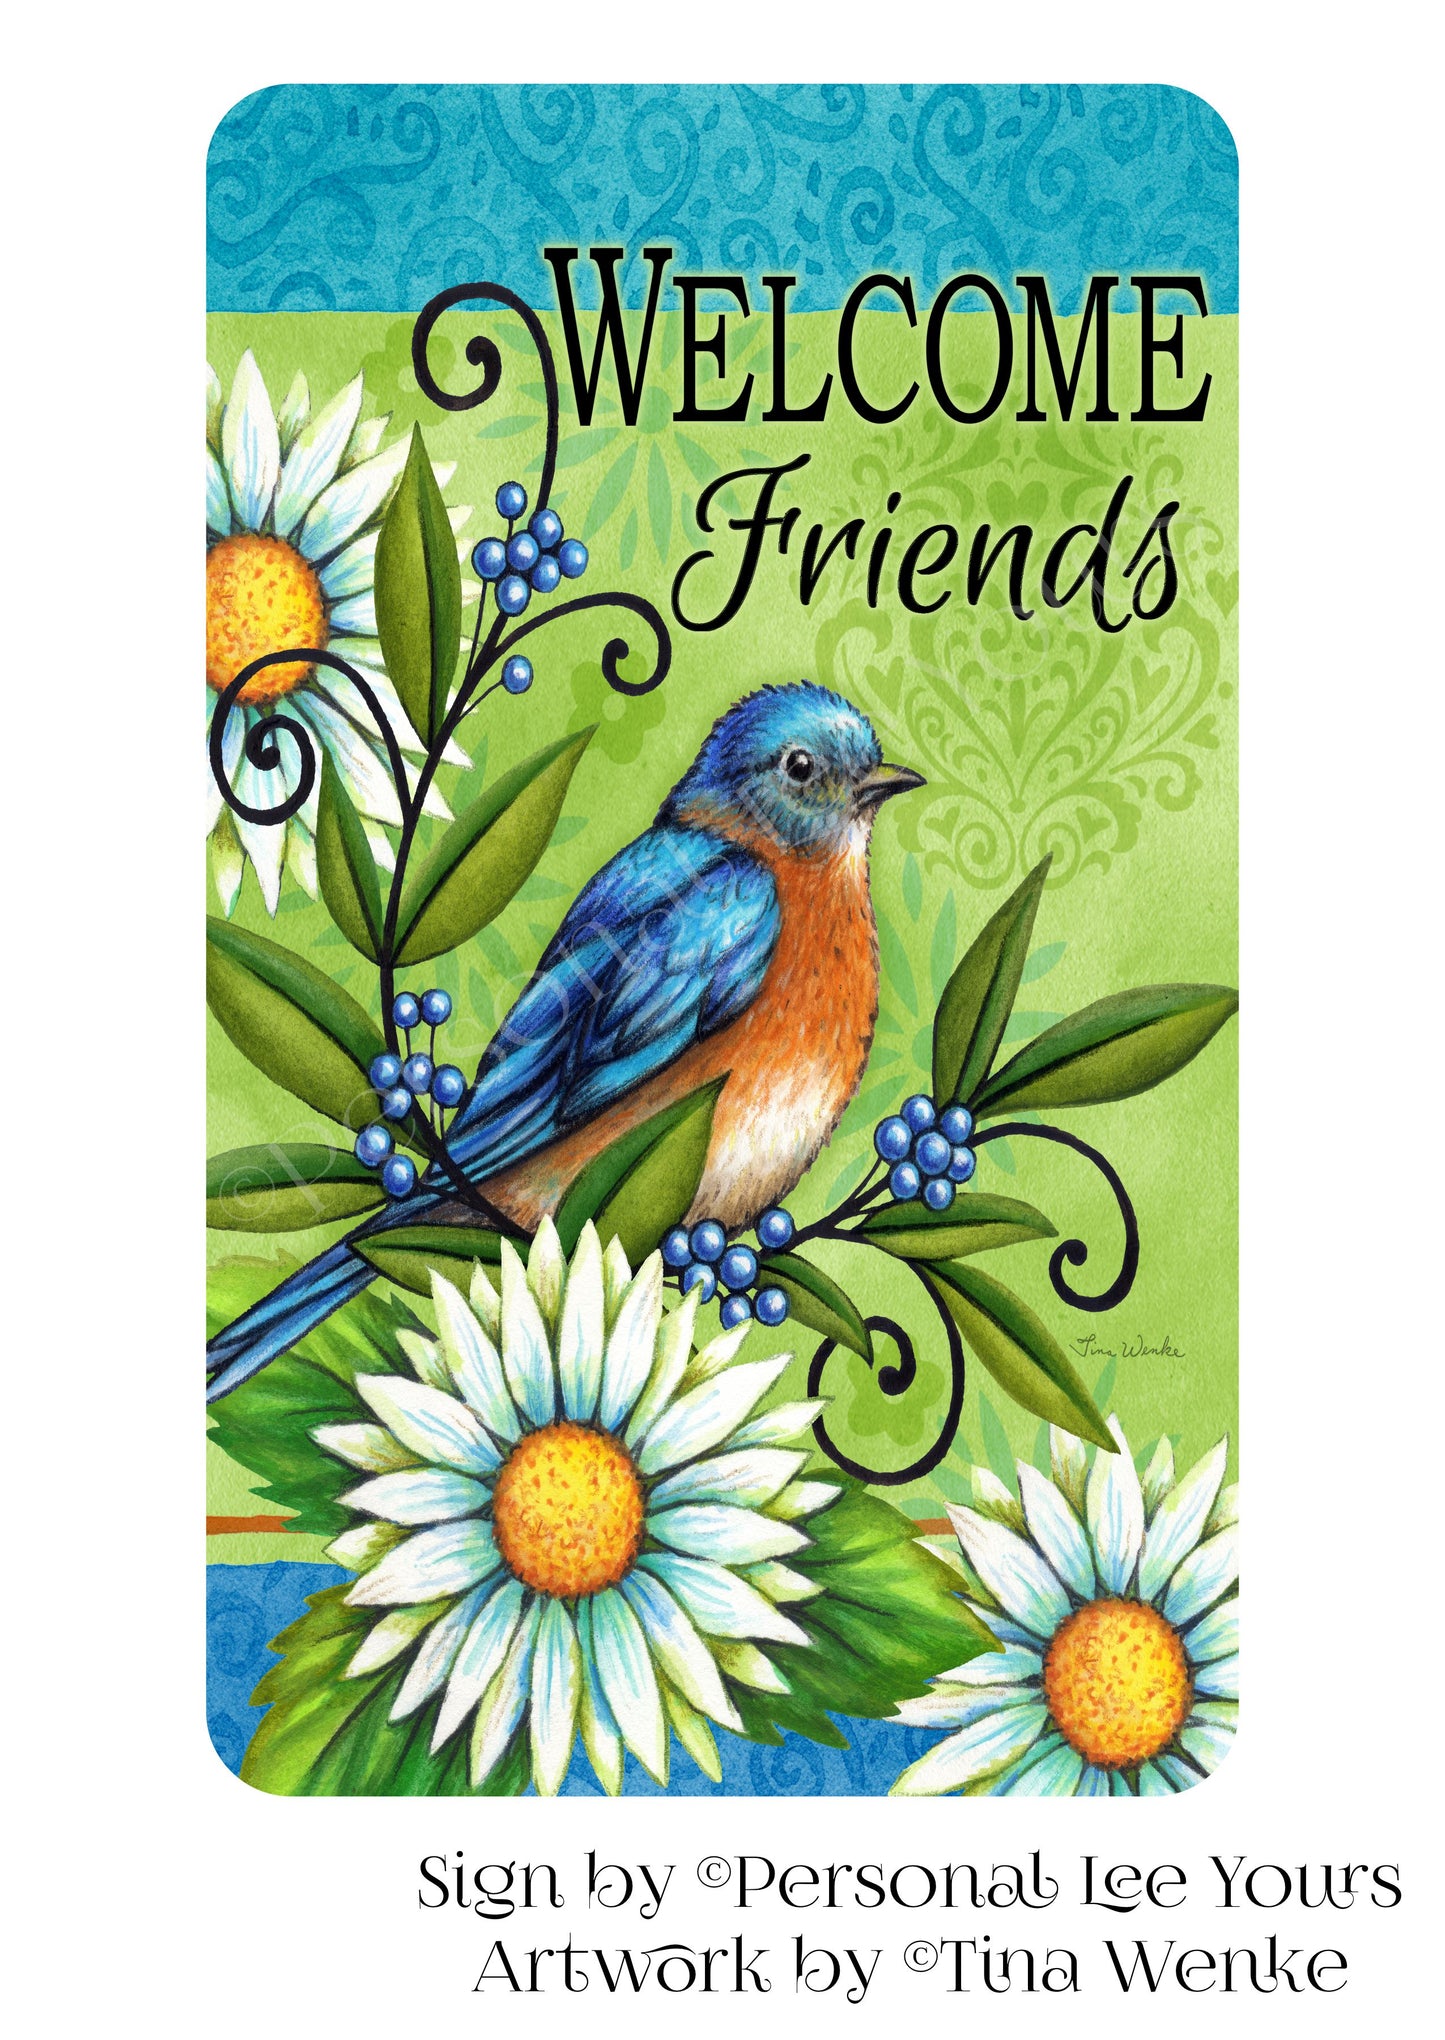 Tina Wenke Exclusive Sign * Bluebird and Daisies Welcome Friends * Vertical * 3 Sizes * Lightweight Metal